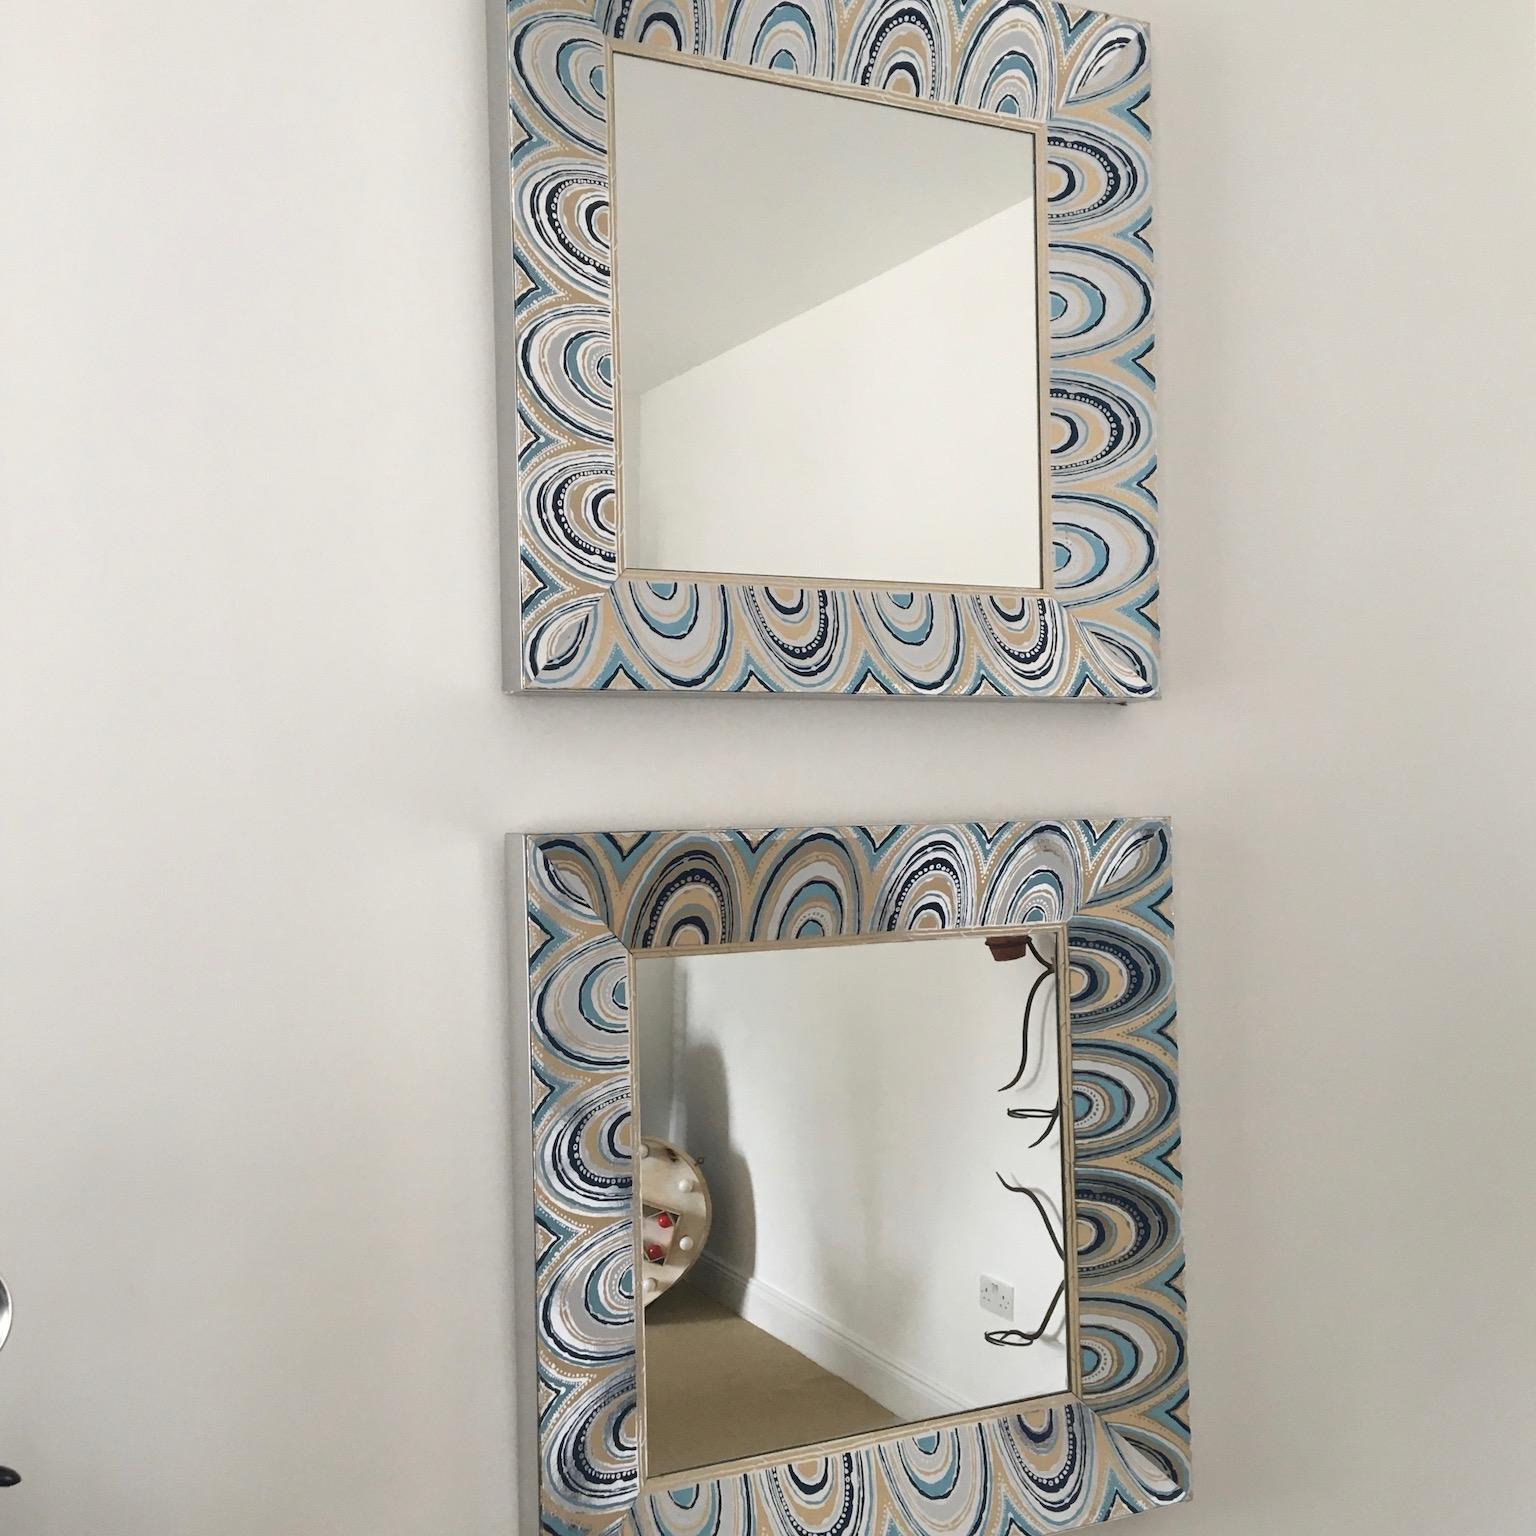 Pair of oversized square shaped mirrors. Fully embody all the glamour and flamboyance of the 1970s. So special and unique the sides are in a matte chrome color and the front is a patterned 'Mylar' finish. Sold independently but perfect as a pair.